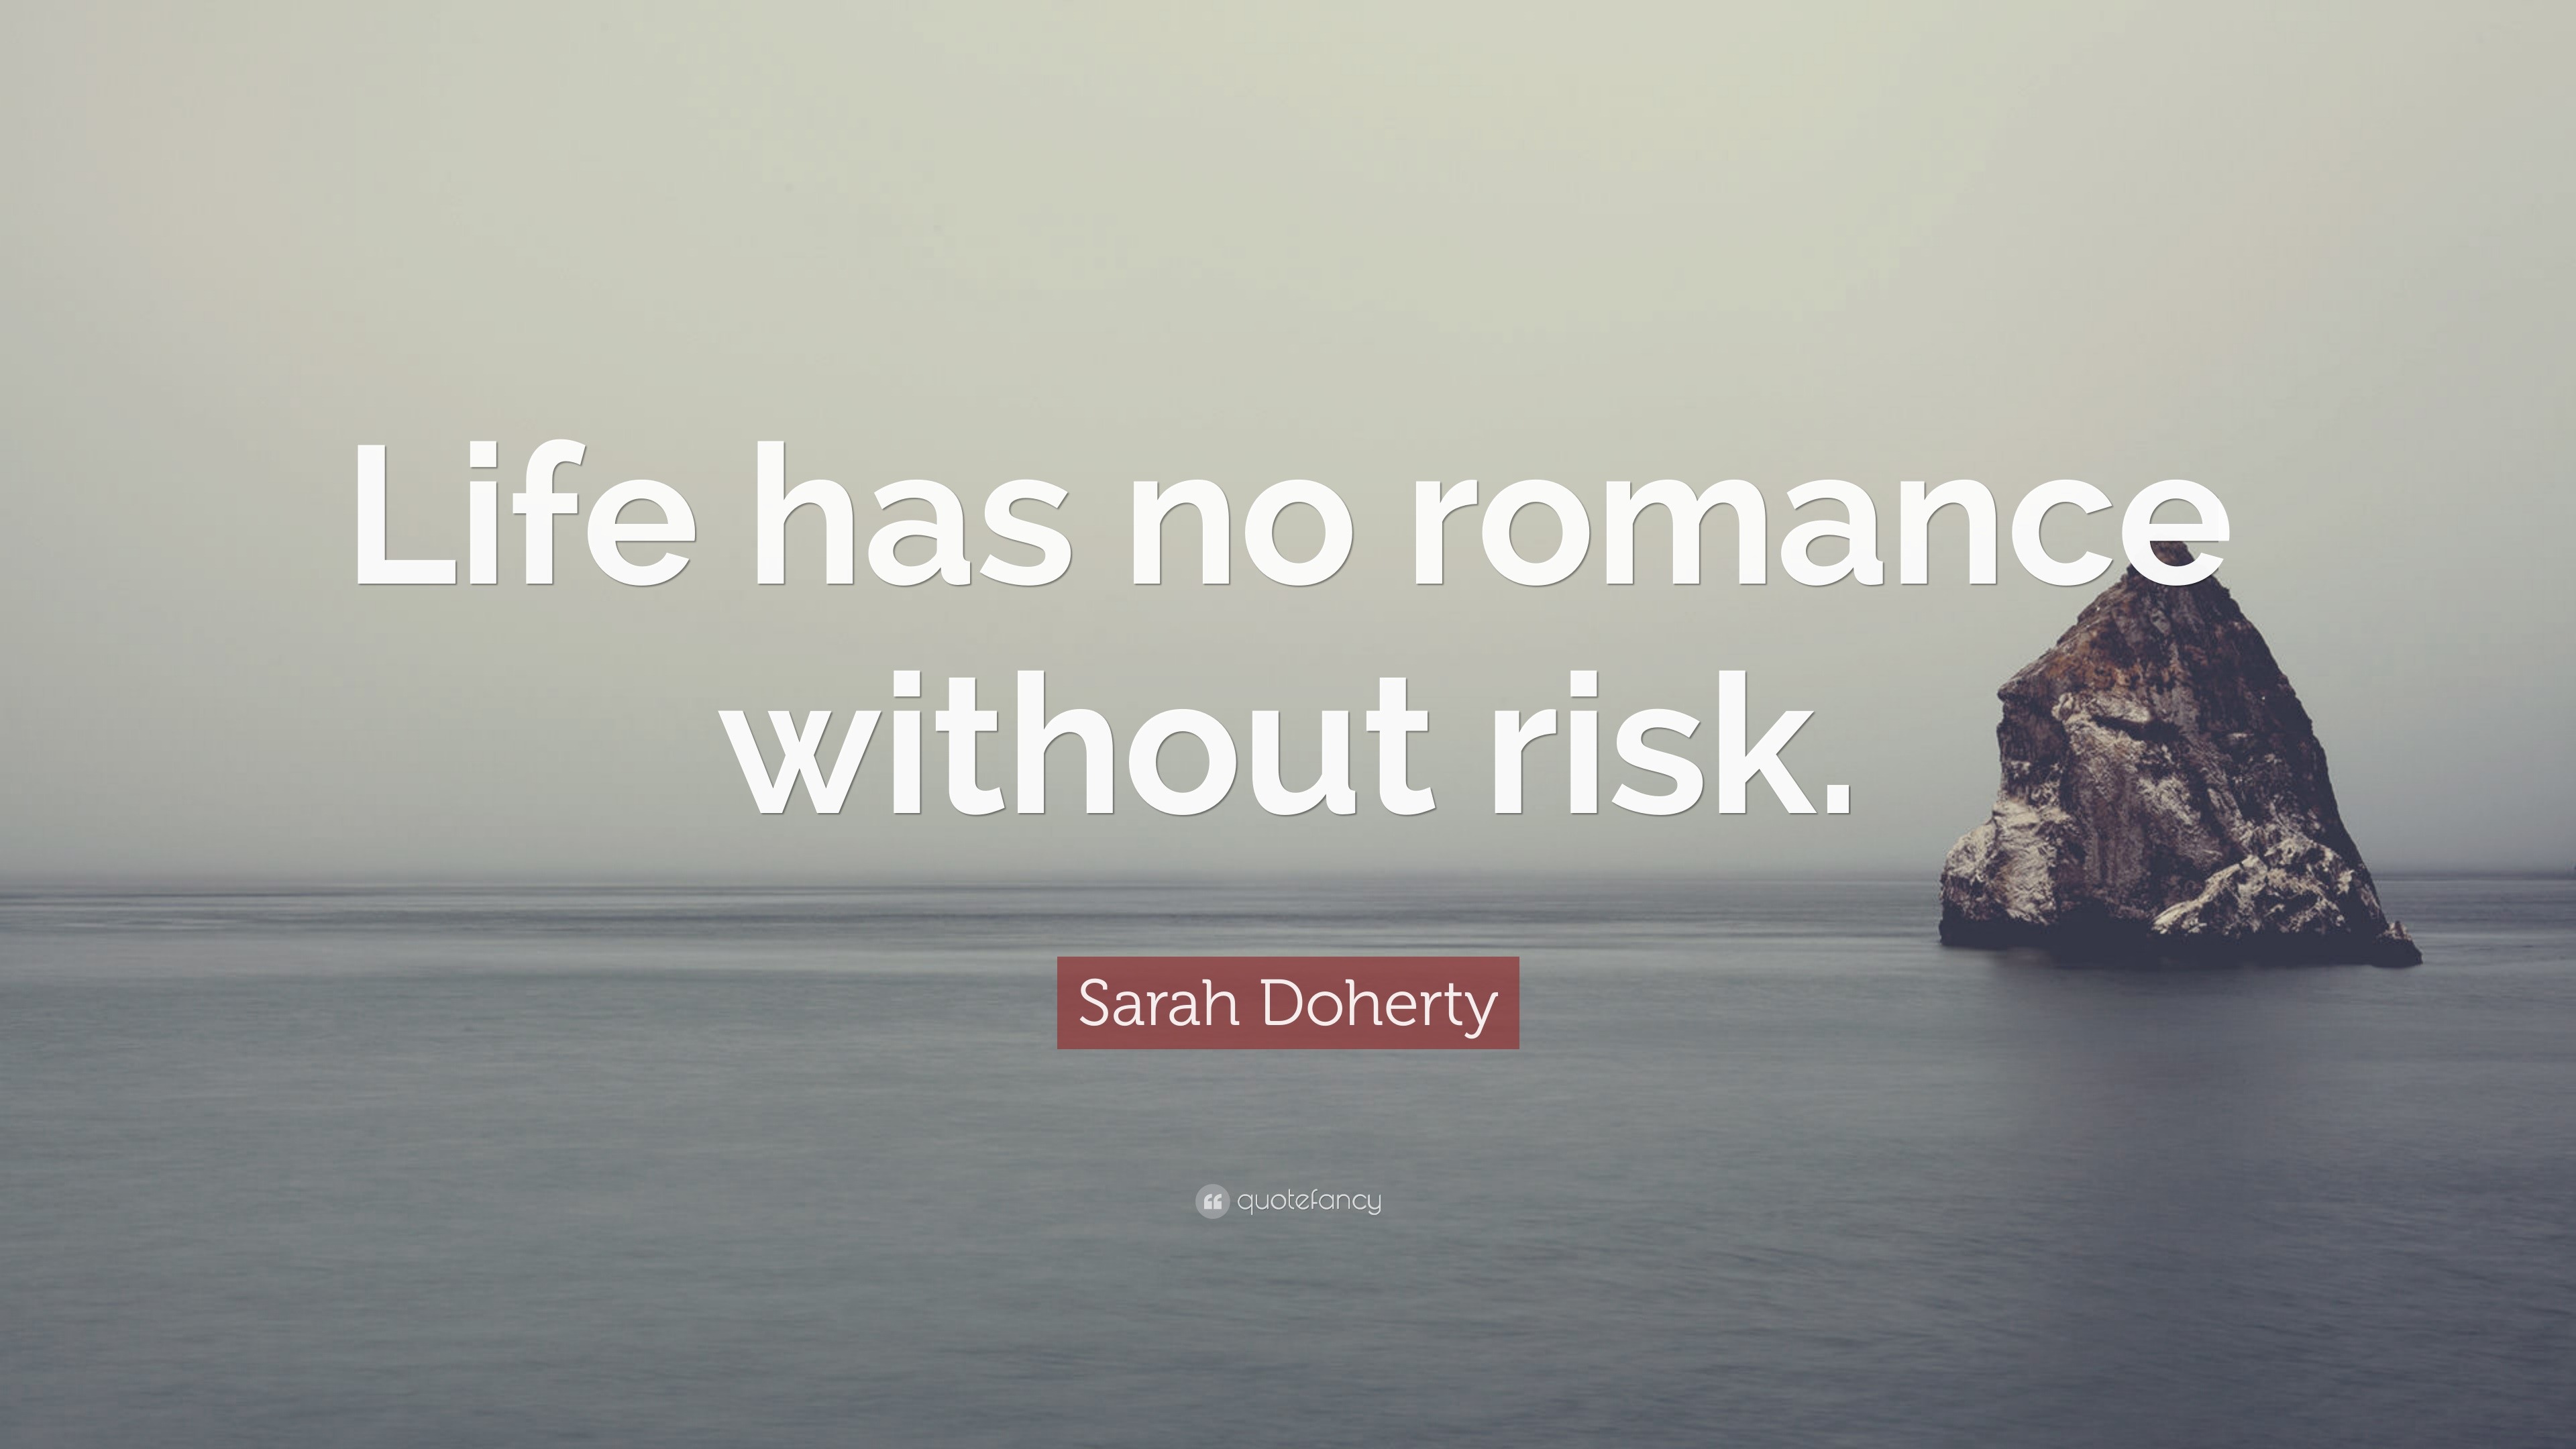 Sarah Doherty Quote “Life has no romance without risk ”